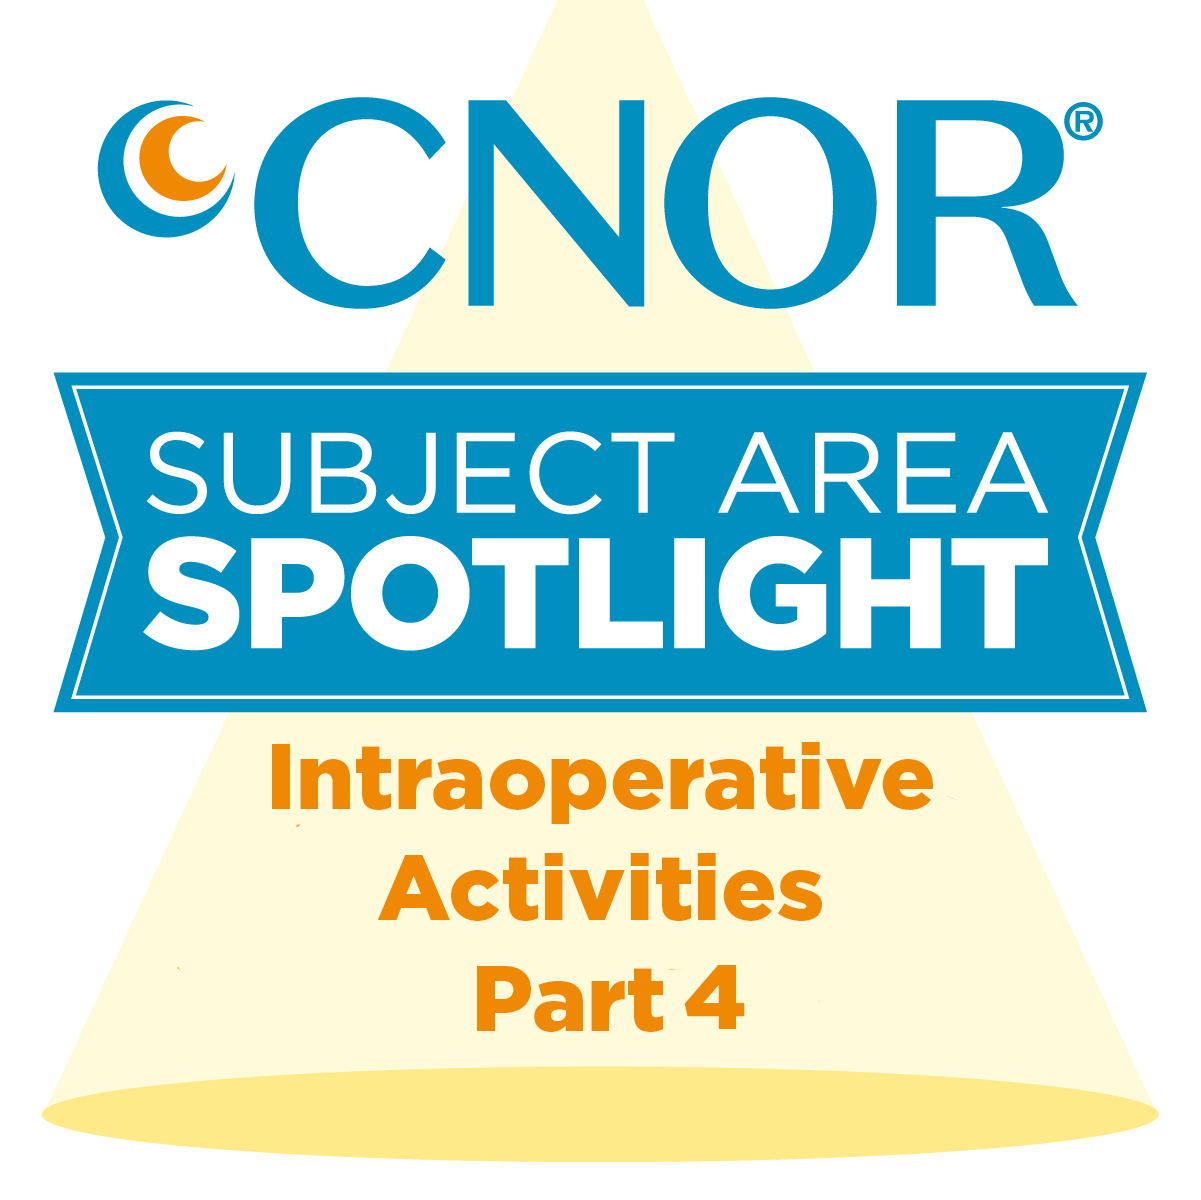 CNOR Subject Area Spotlight: Management of Intraoperative Activities Patient Care and Safety Part 4 